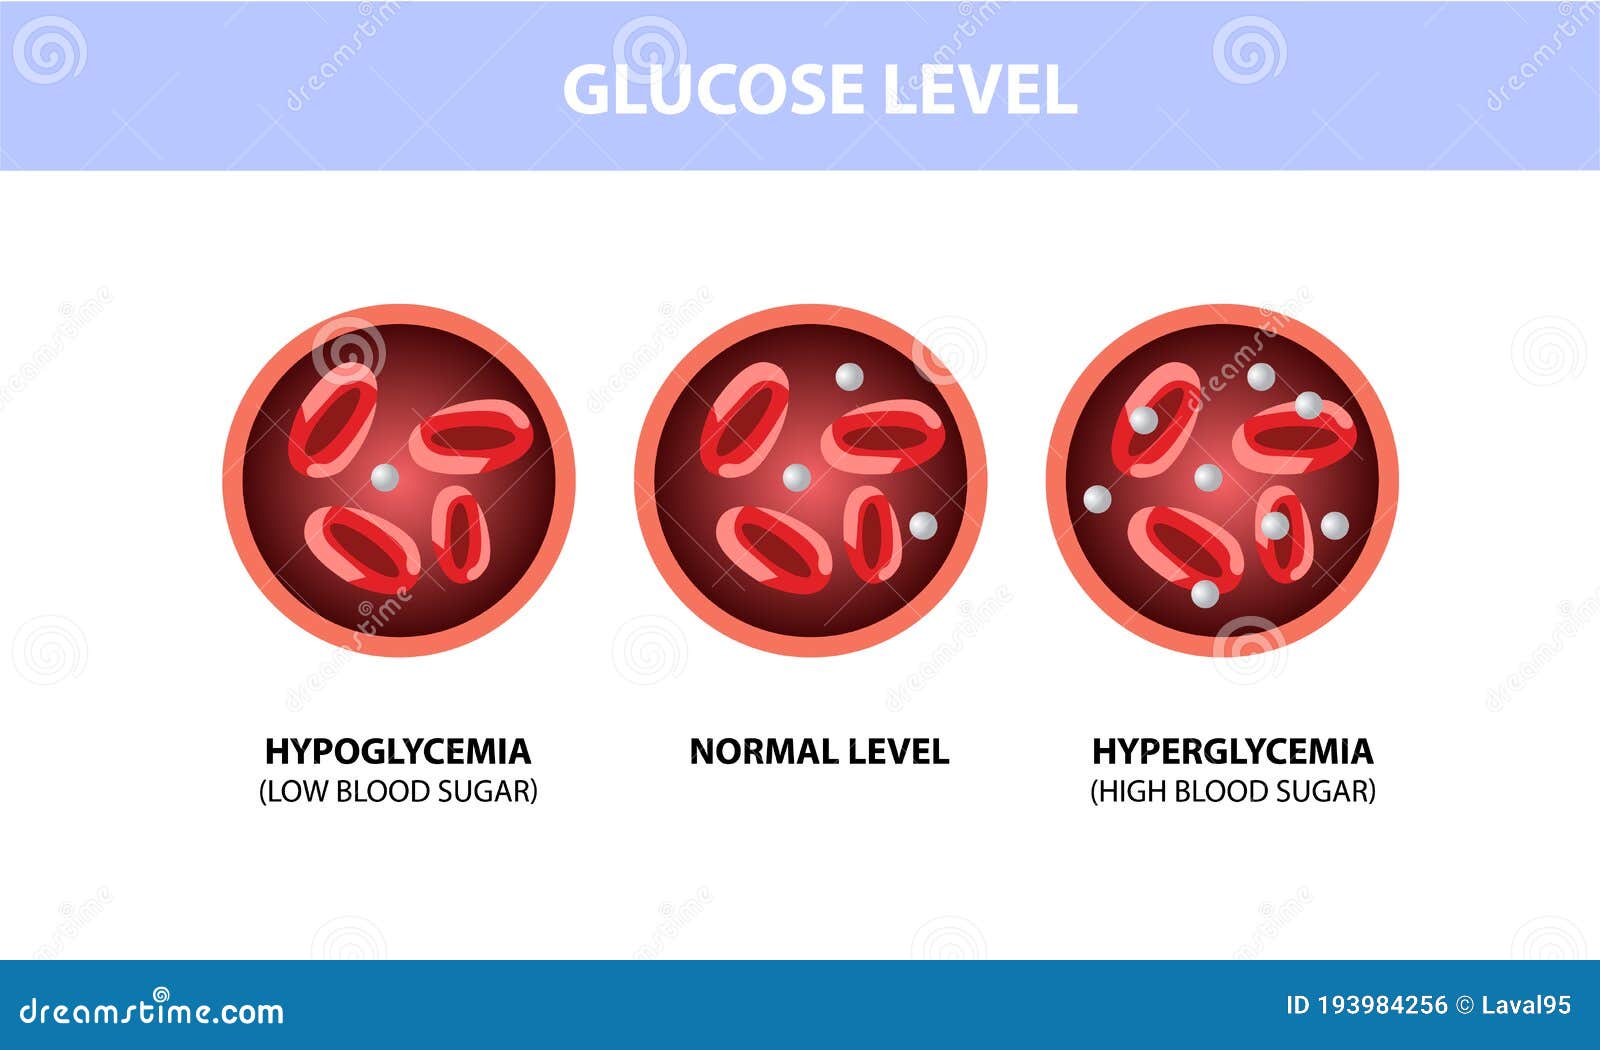 blood sugar glucose test. diabetes, insulin, hypoglycemia or hyperglycemia diagram, red blood cells and glucose